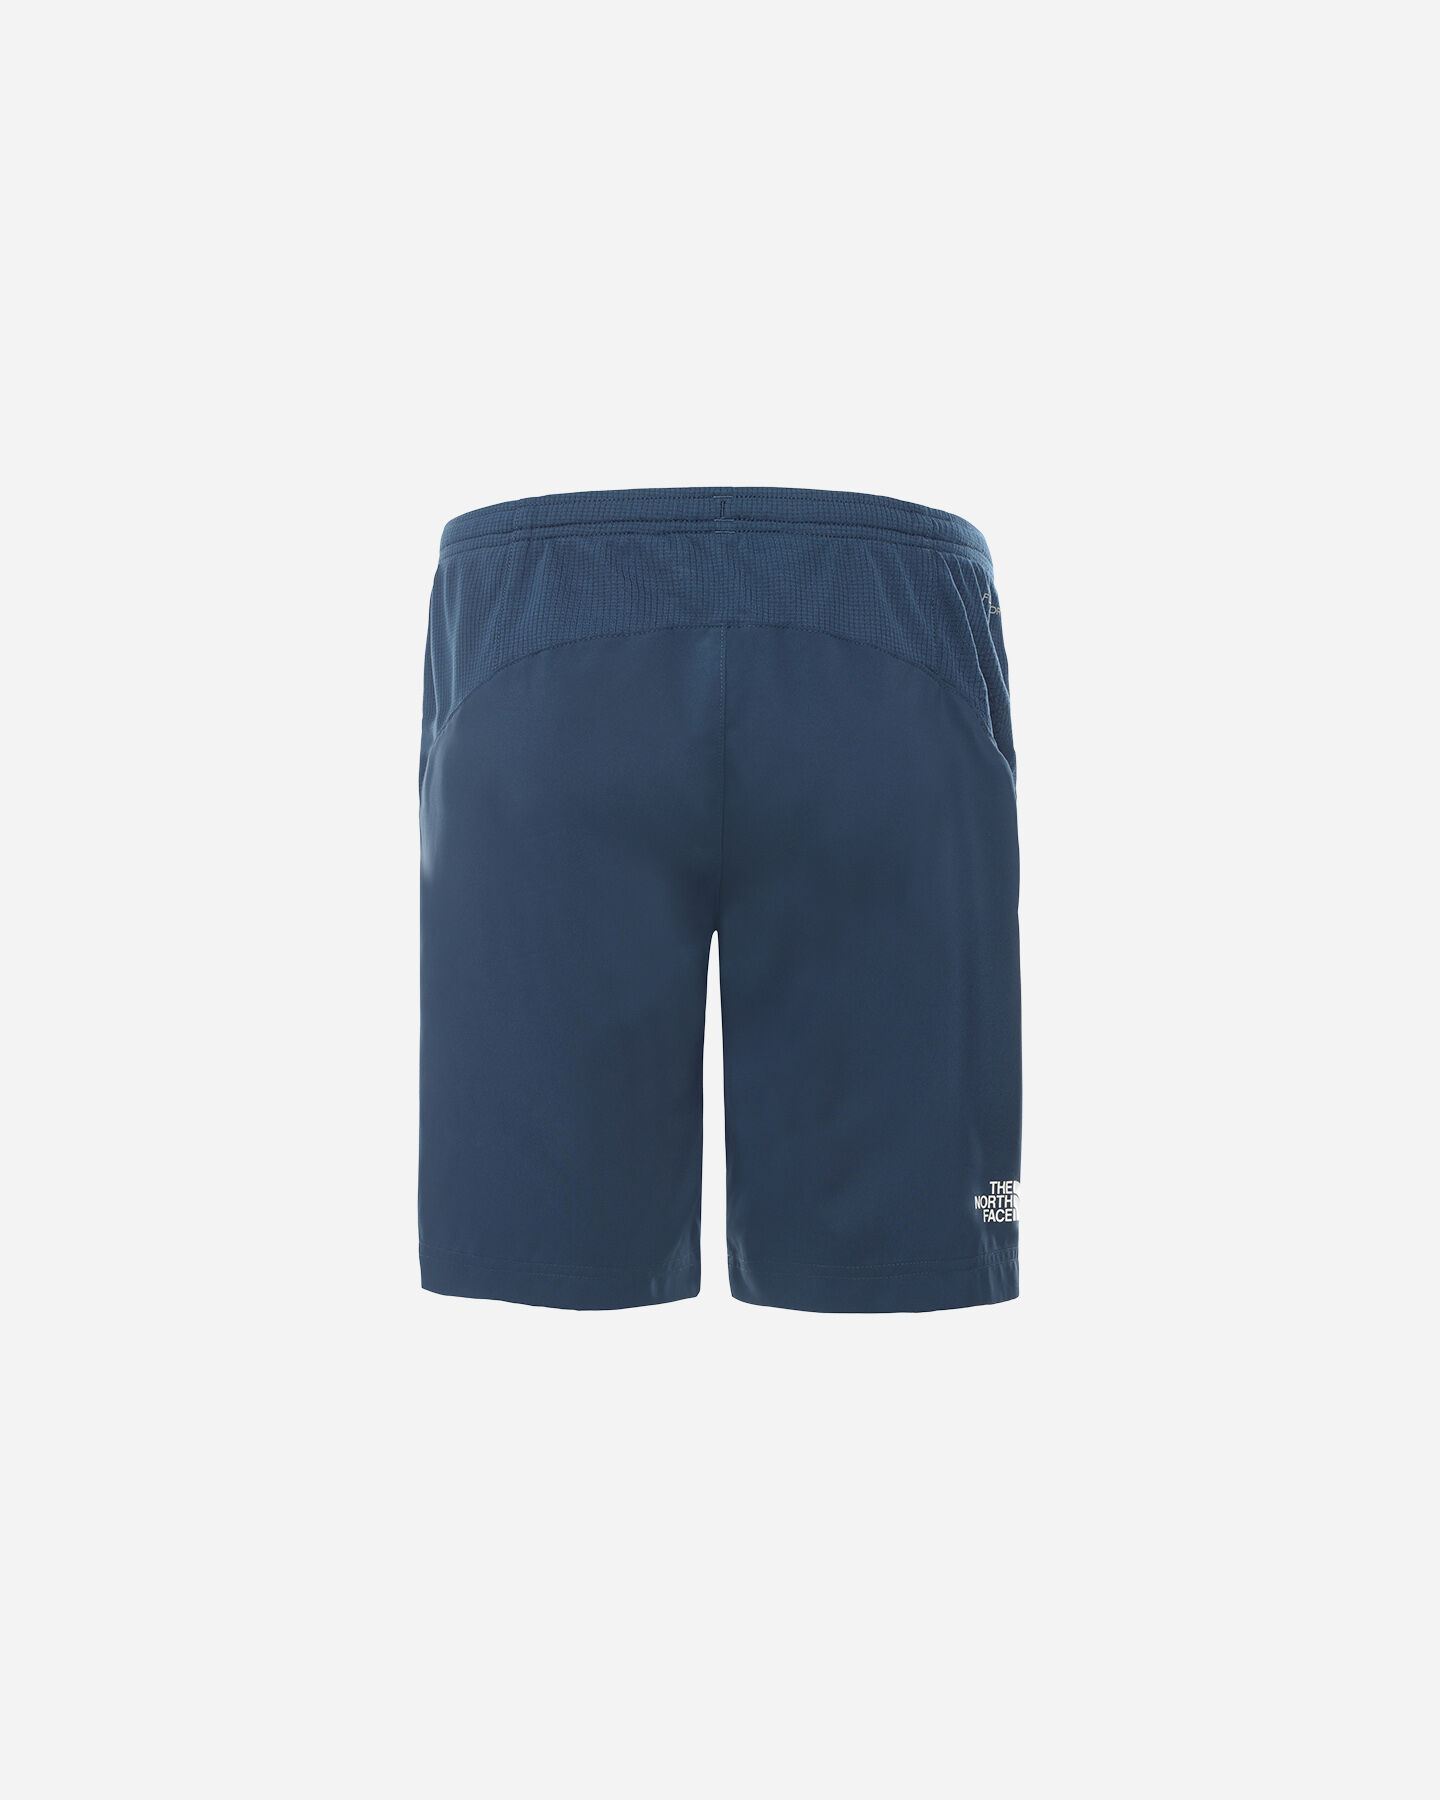  Pantaloncini THE NORTH FACE REACTOR JR S5202377|N4L|XS scatto 1